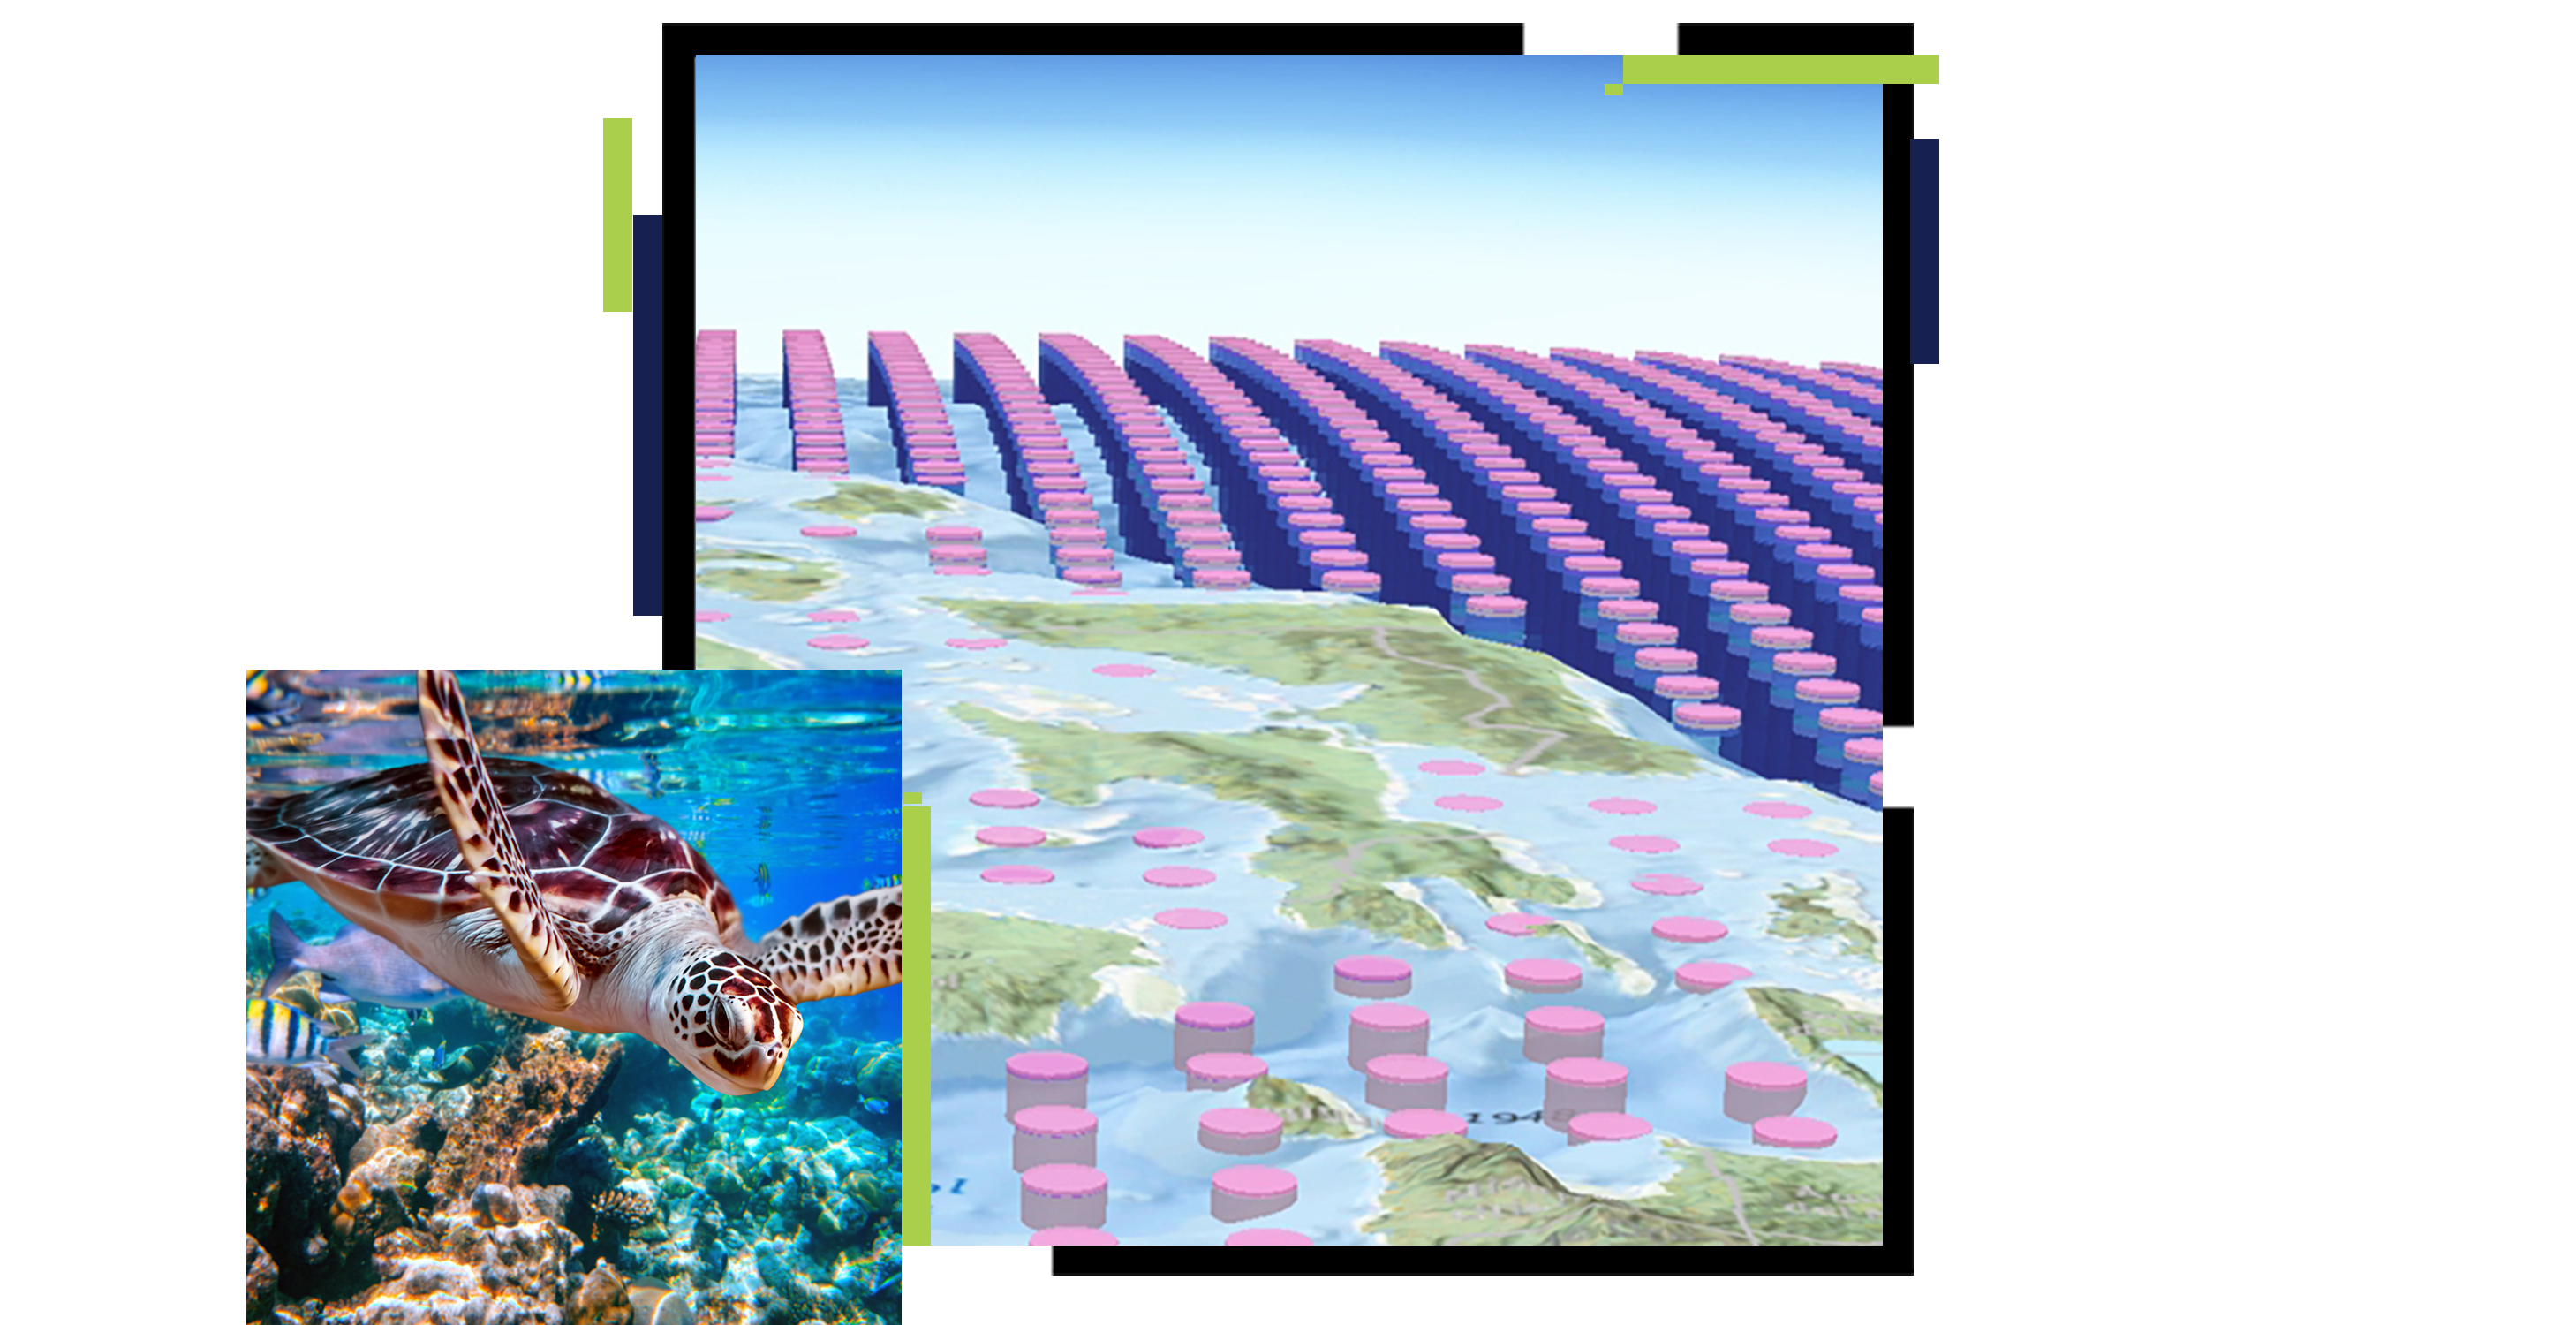 Two squares showing a turtle swimming under clear water near a core reef and a map with illustrated purple cylinders coming out of the ocean to show sea level